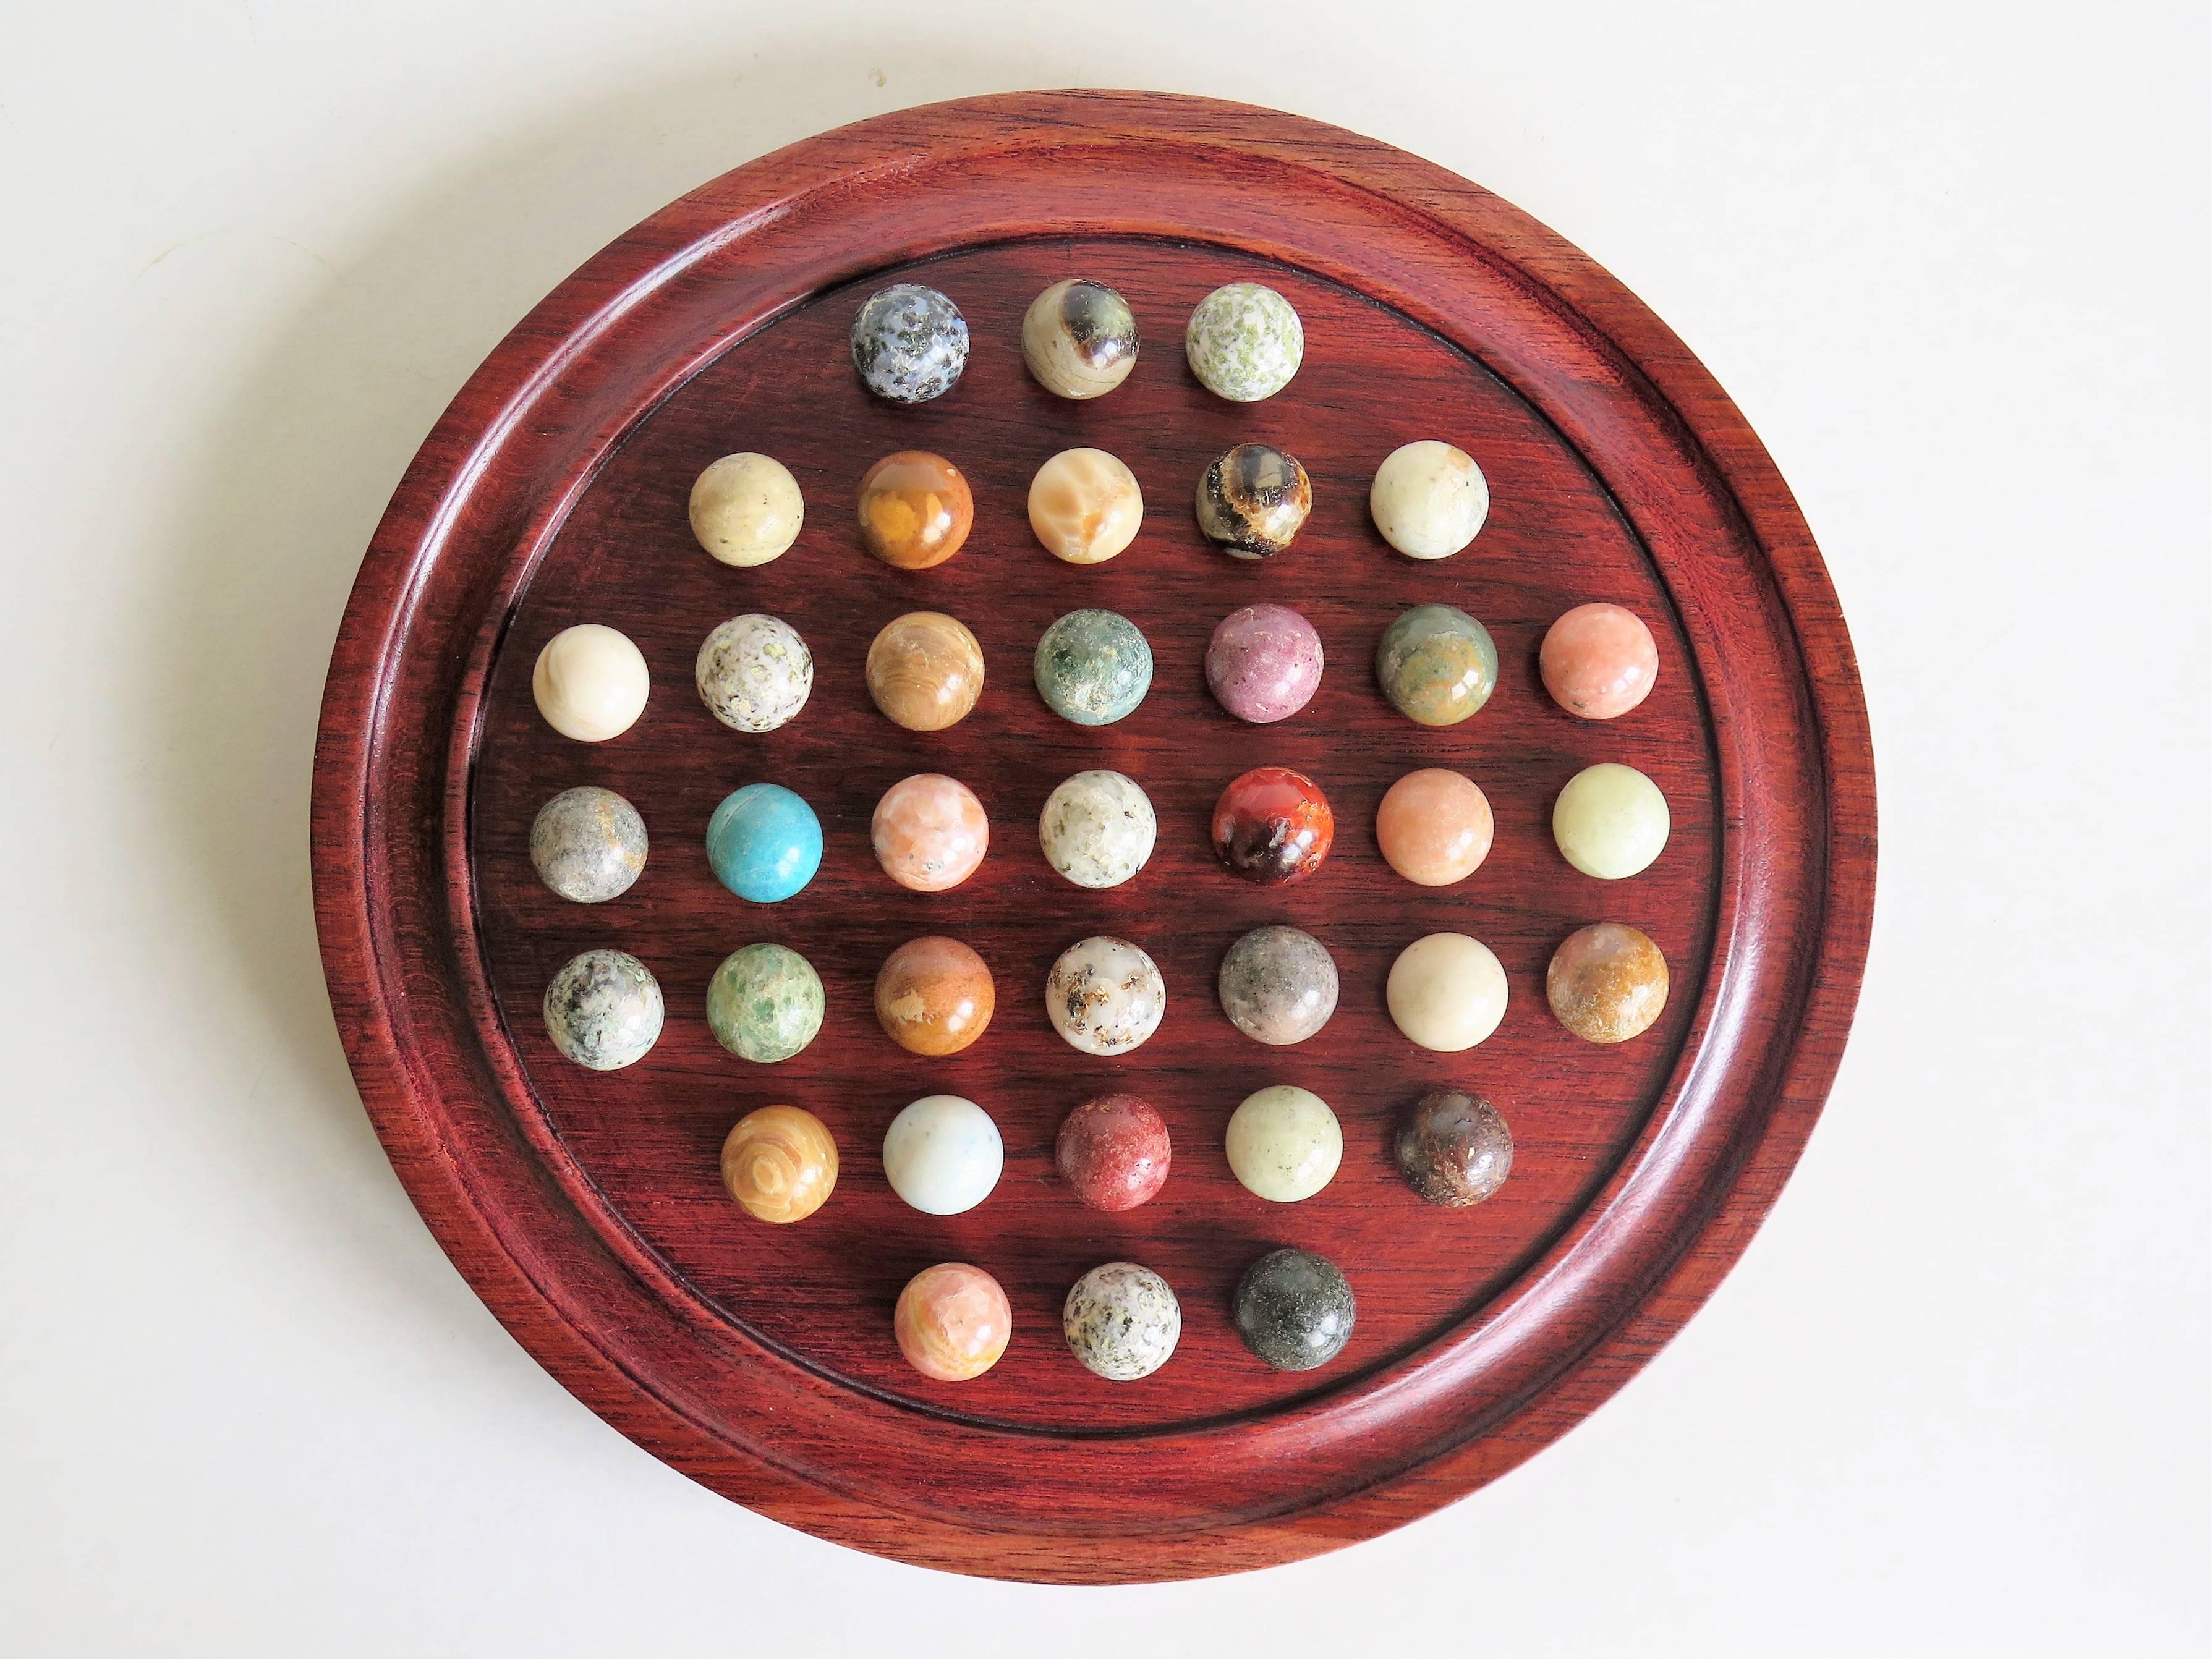 20th Century Edwardian Marble Solitaire Board Game with 37 Agate Stone Marbles, circa 1910